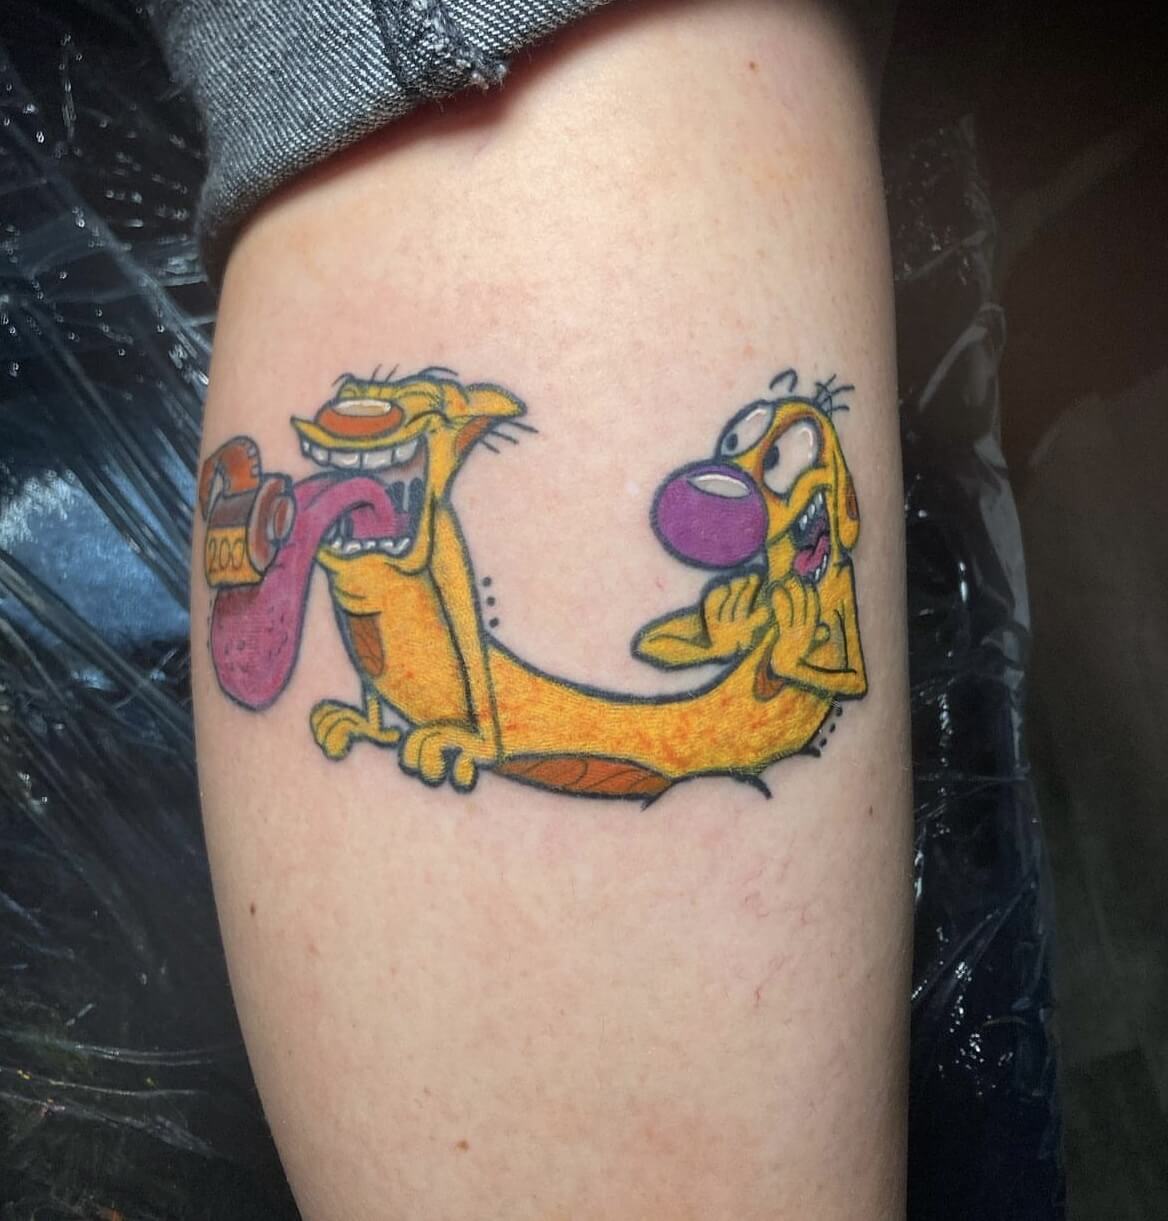 "CatDog" Cartoon Anime Tattoo by Funk Tha World for Jordan Ulm At Iron Palm Tattoos In downtown Atlanta, Georgia. CatDog is a popular animated television series that aired in the late 1990s to early 2000s,. People tend to get the tattoo as a reference to the era they grew up in. Others relate to the character of CatDog, which is a hard to imagine hybrid of a cat and dog. The character embodies the idea of being different or not fitting into a specific category, Getting a CatDog tattoo is a way for people to express their own individuality and embrace their quirks. Call 404-973-7828 or stop by for a free consultation with Funk or another Iron Palm body artist . Walk ins are welcome. #catdoglover #catdogtattoo #catdogcartoon #atlanta #atlantatattoo #atlantatattooshop #atlantatattooartist #atlantatattoostudio #tattoo #tattooshop #tattooart #tattoodesign #animetattoo #animetattooideas #animetattooers #cartoonart #cartoontattoo